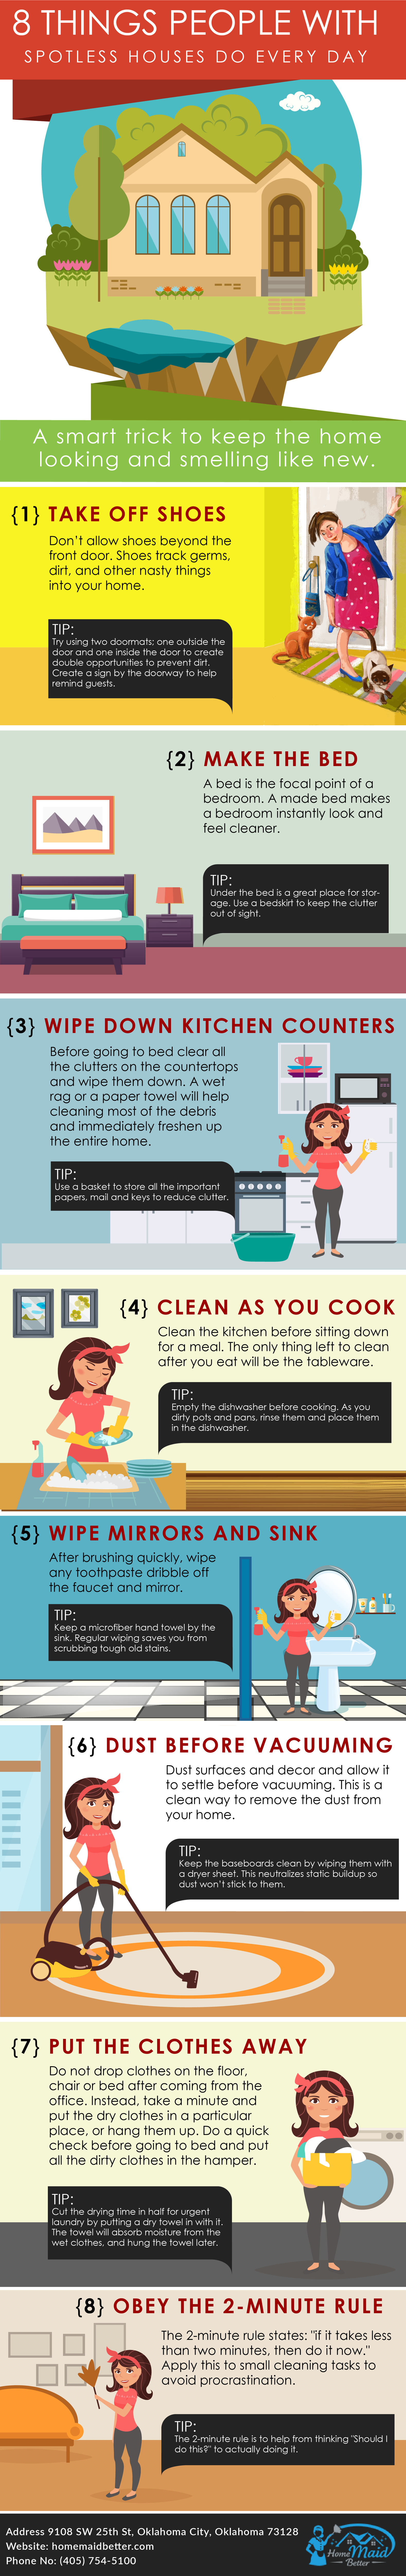 30 cleaning tips – quick and easy ideas to leave your home spotless